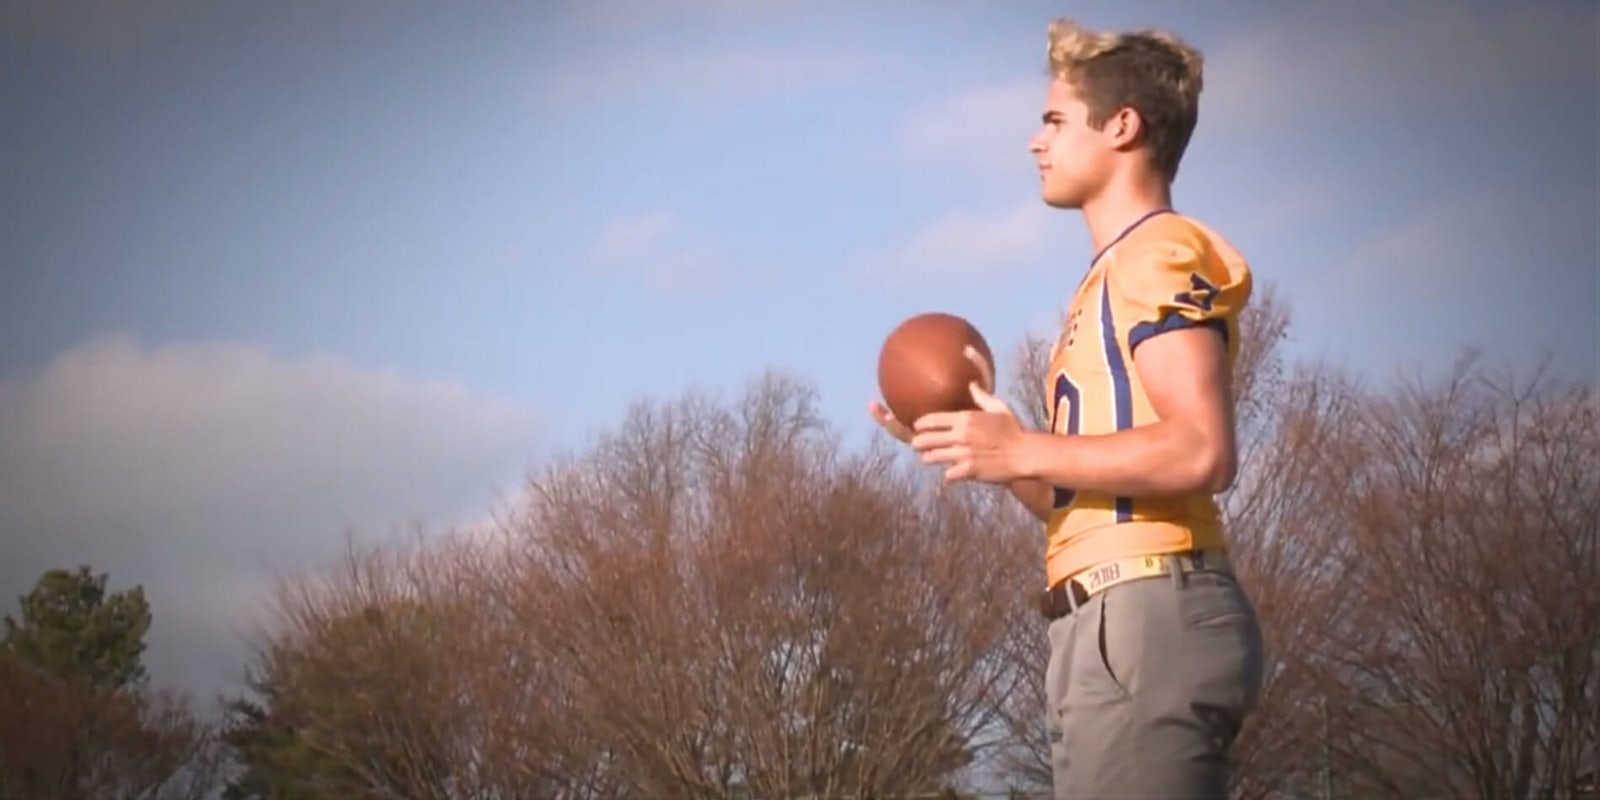 Football star Jake Bain was targeted by the Westboro Baptist Church earlier this year.